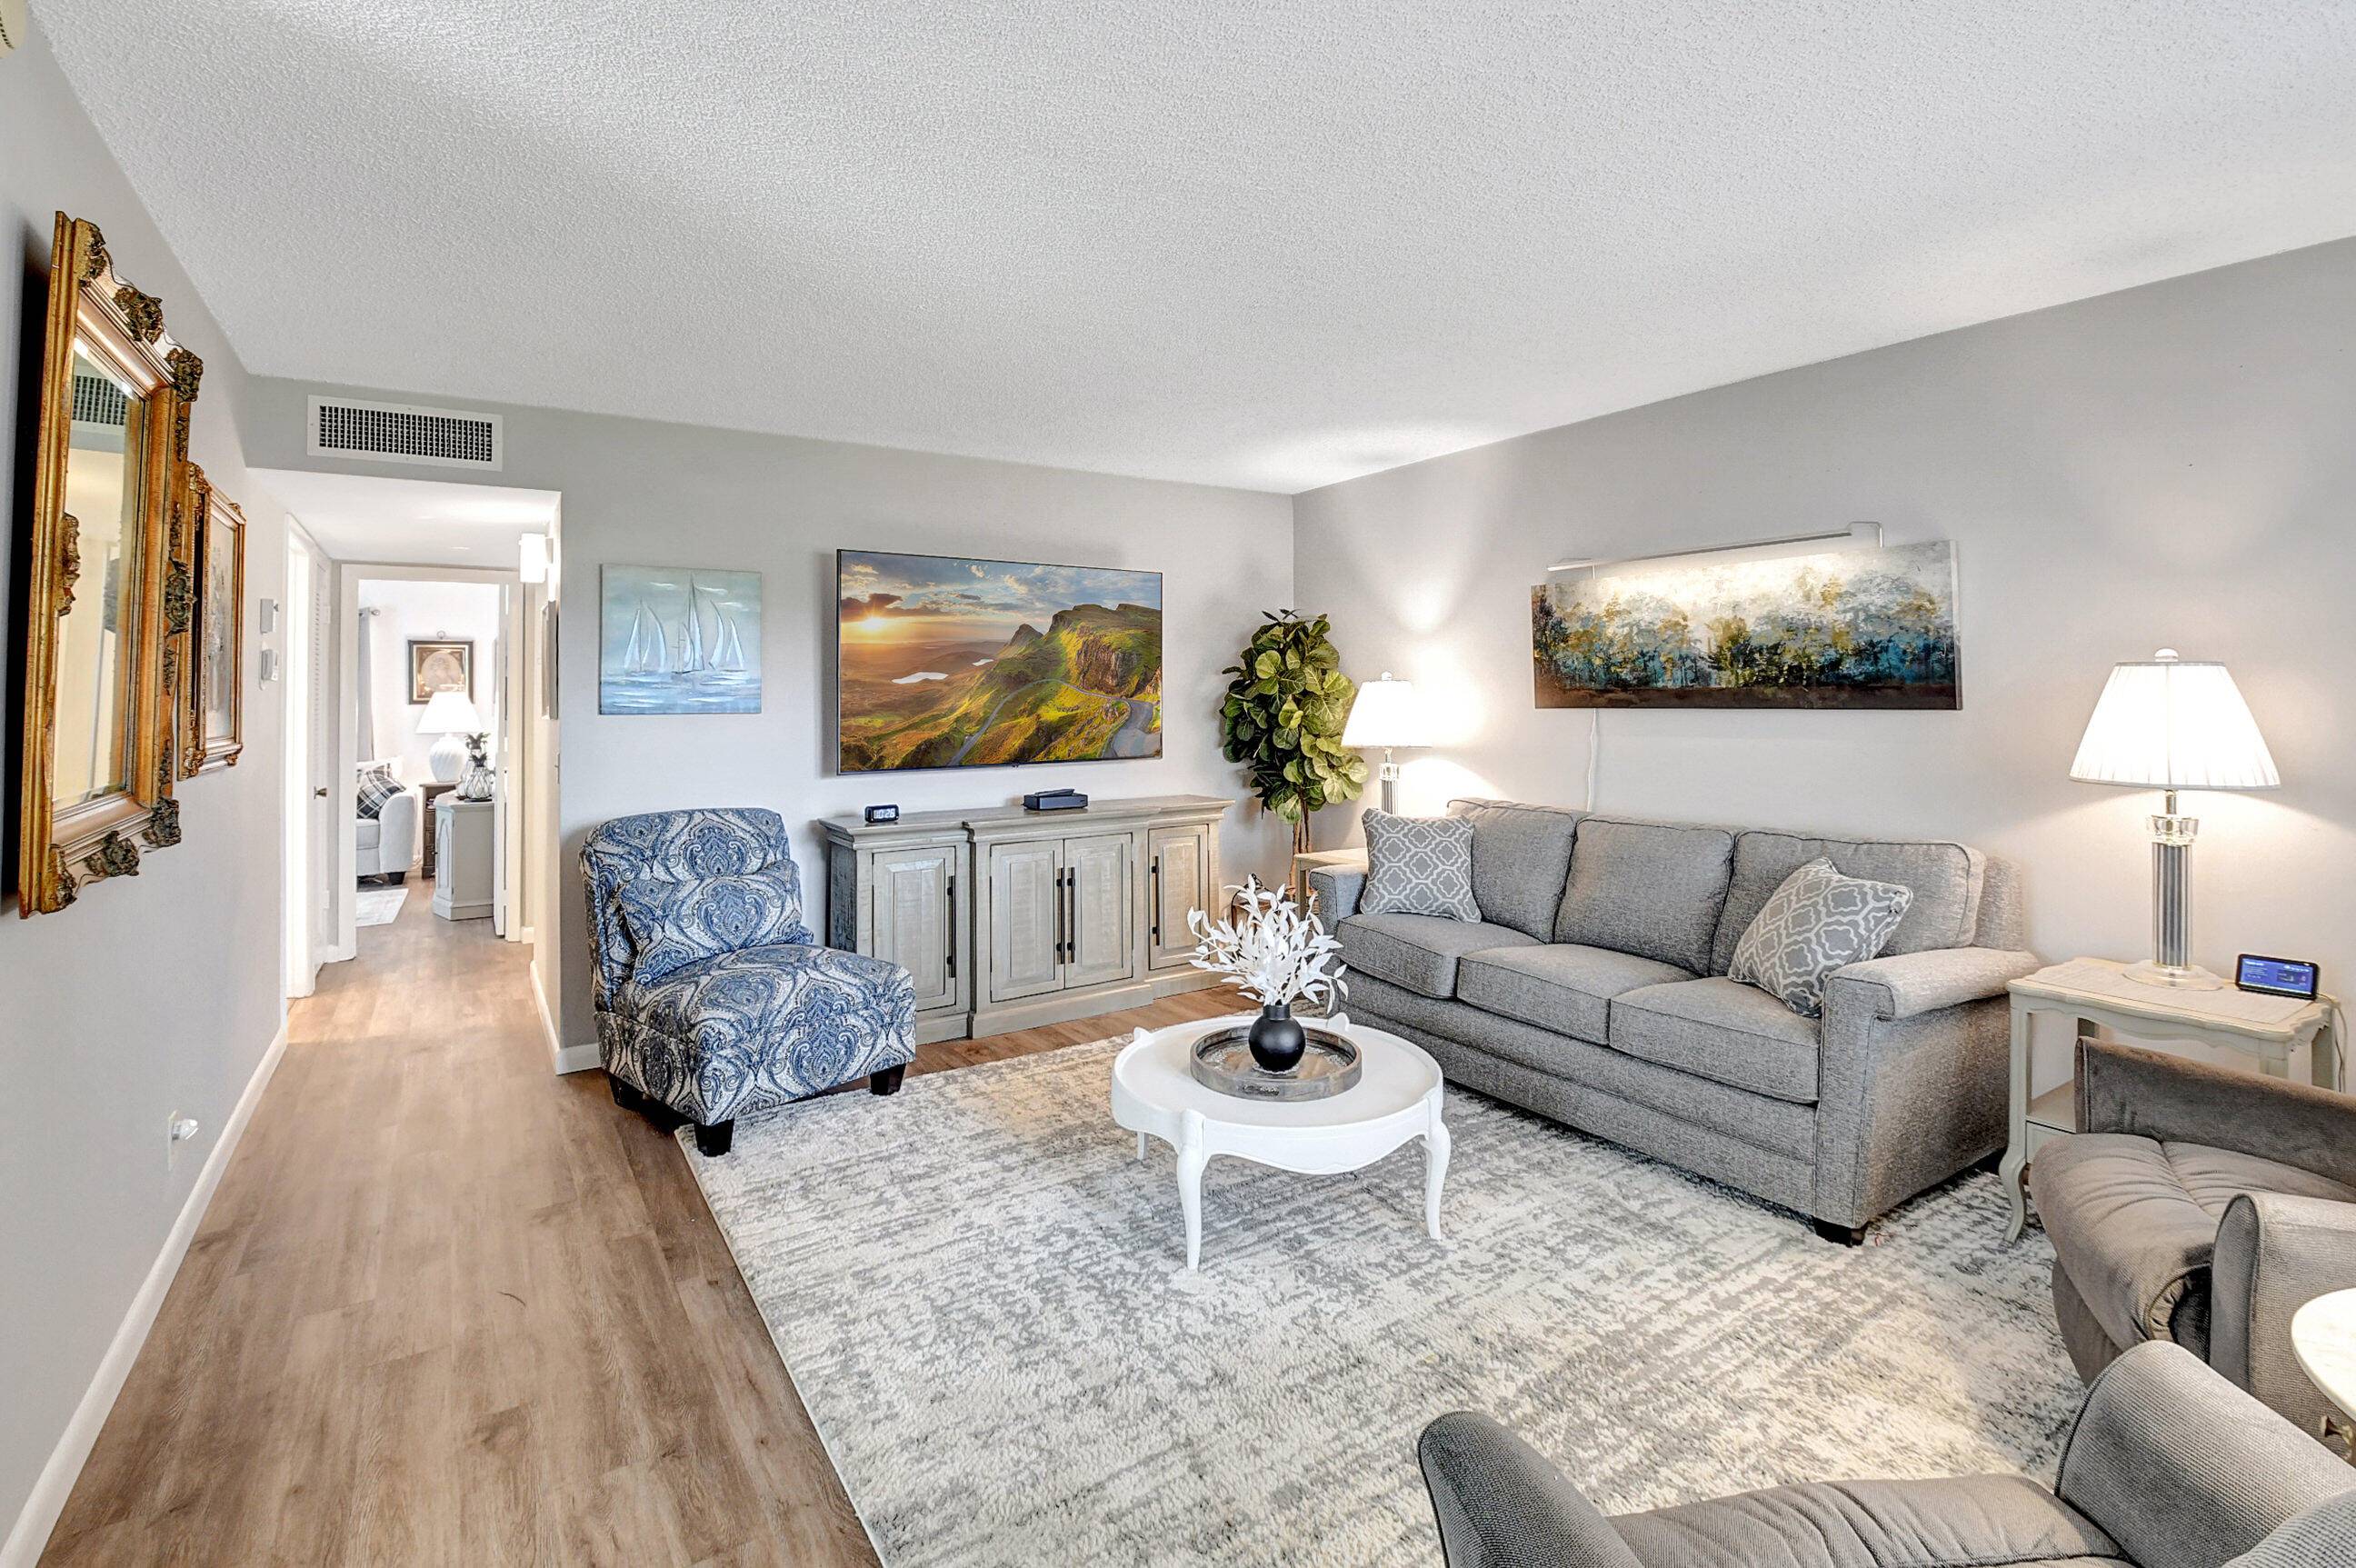 Introducing a stunning two bedroom condo that has undergone a complete remodel, offering a modern and luxurious living experience.